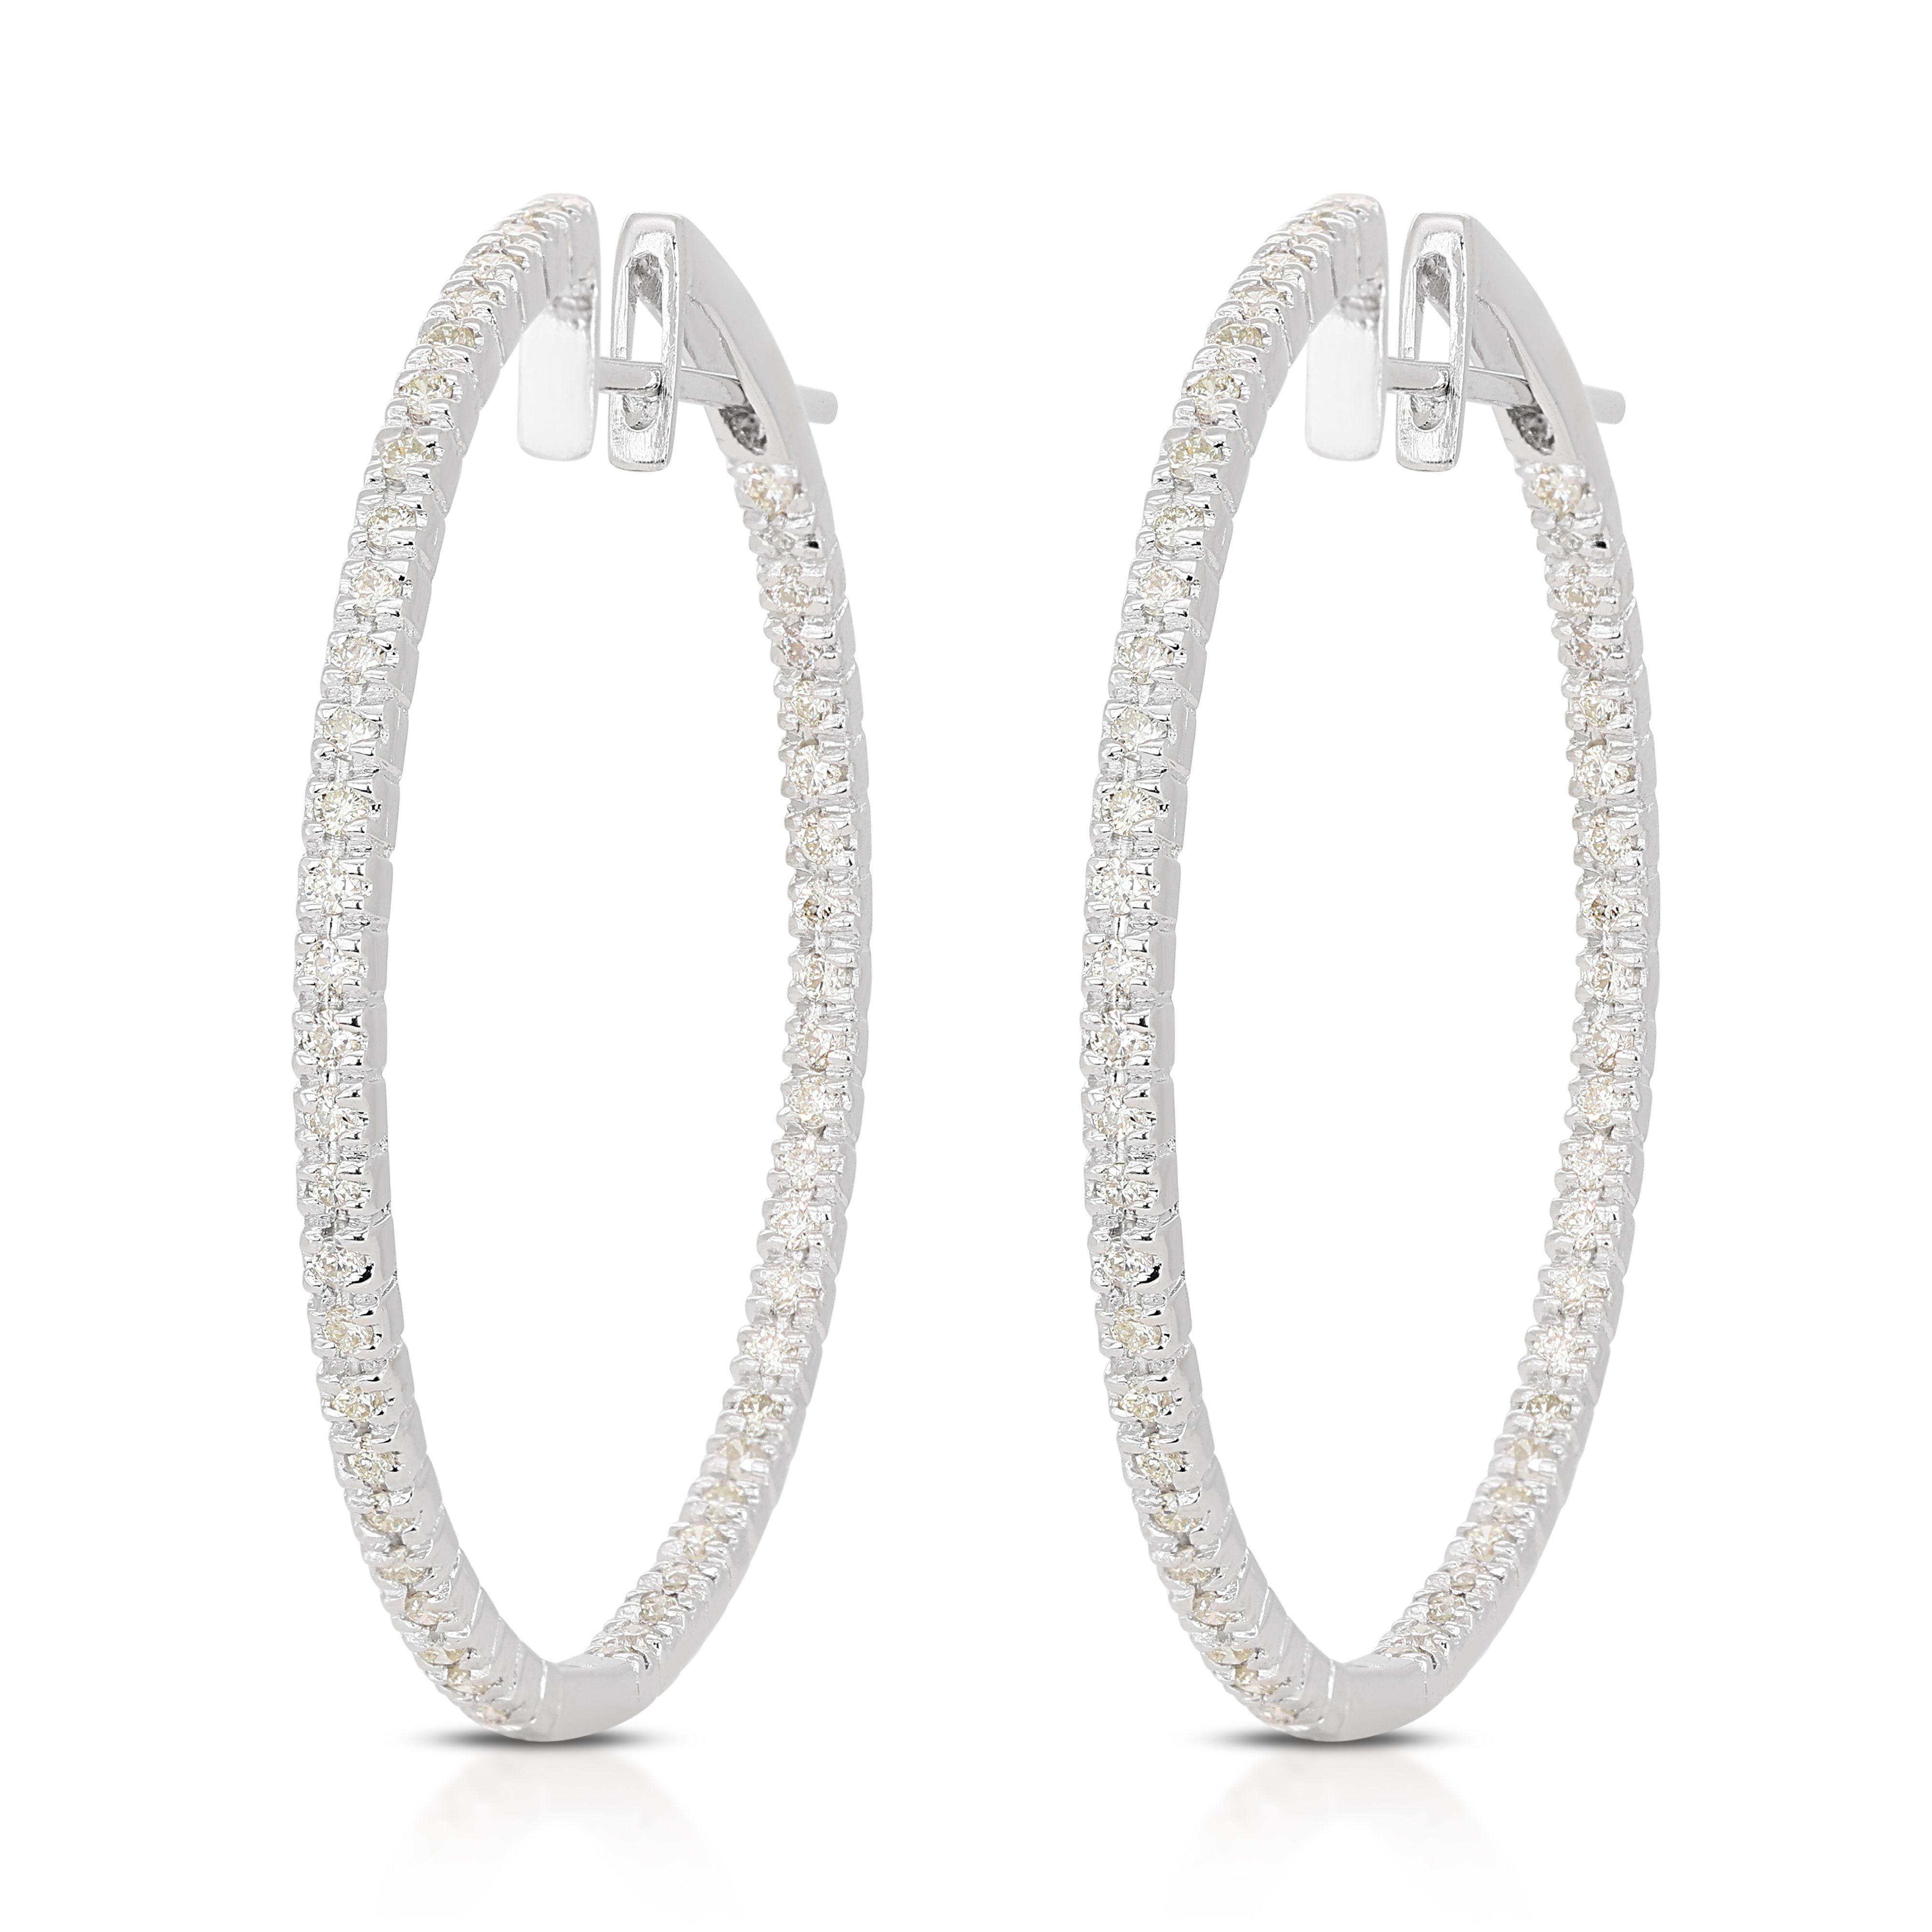 Sparkling 0.51ct Diamond Hoop Earrings in 18K White Gold In New Condition For Sale In רמת גן, IL